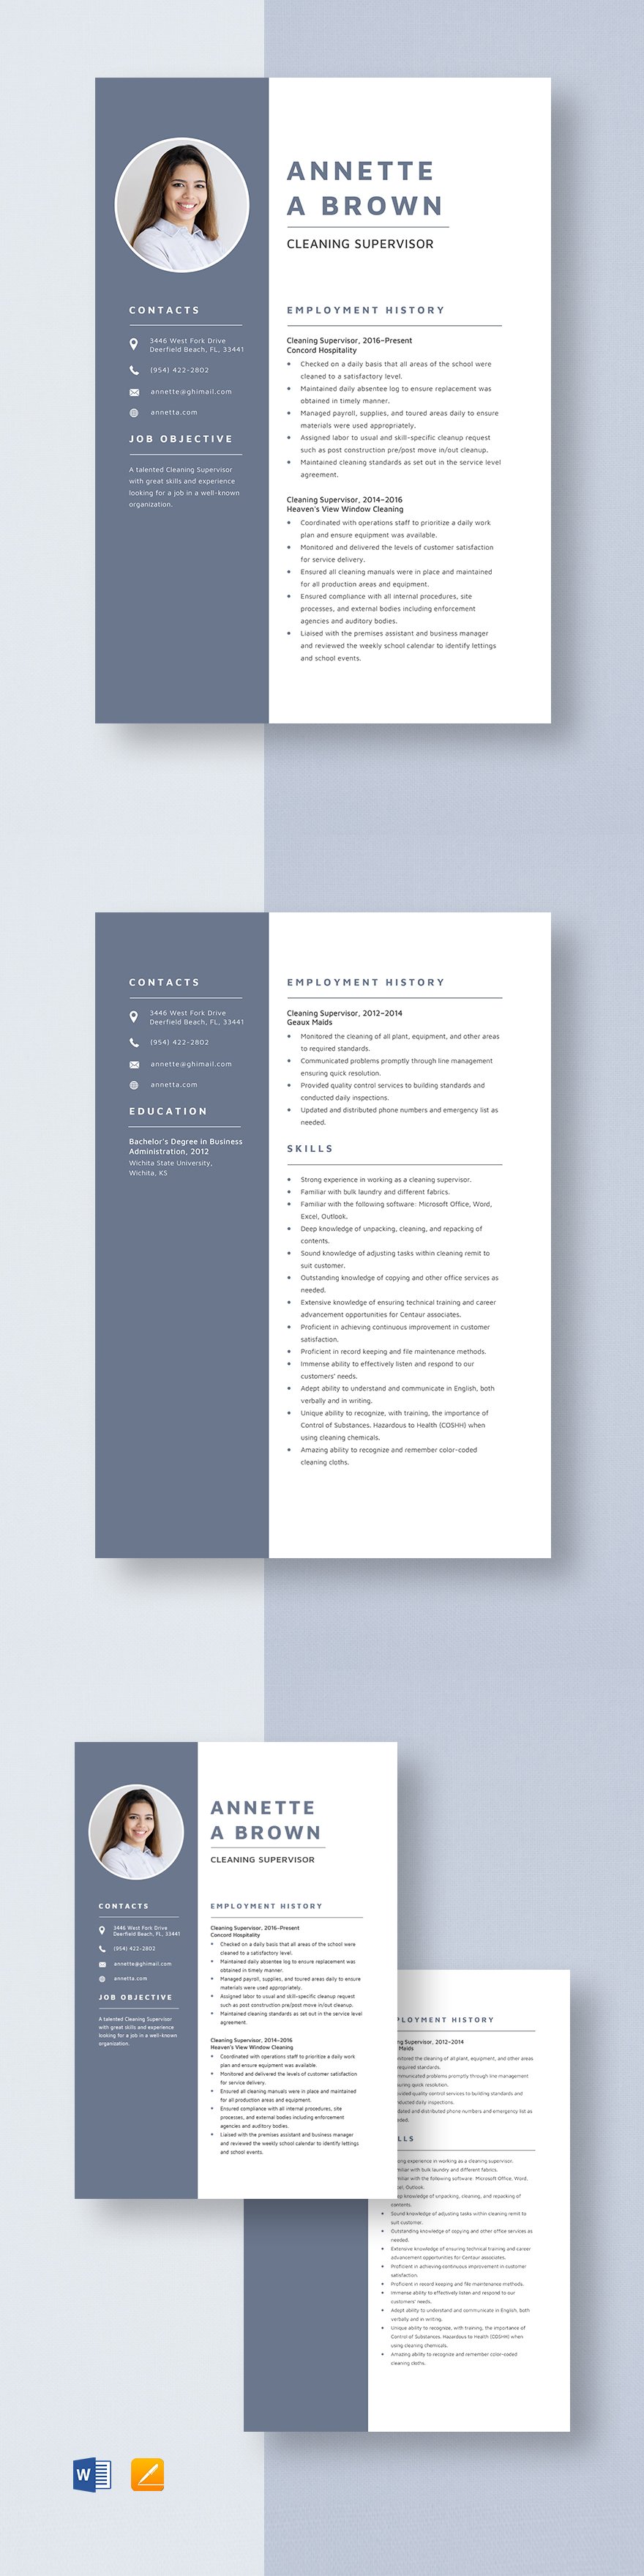 Free Cleaning Supervisor Resume Template